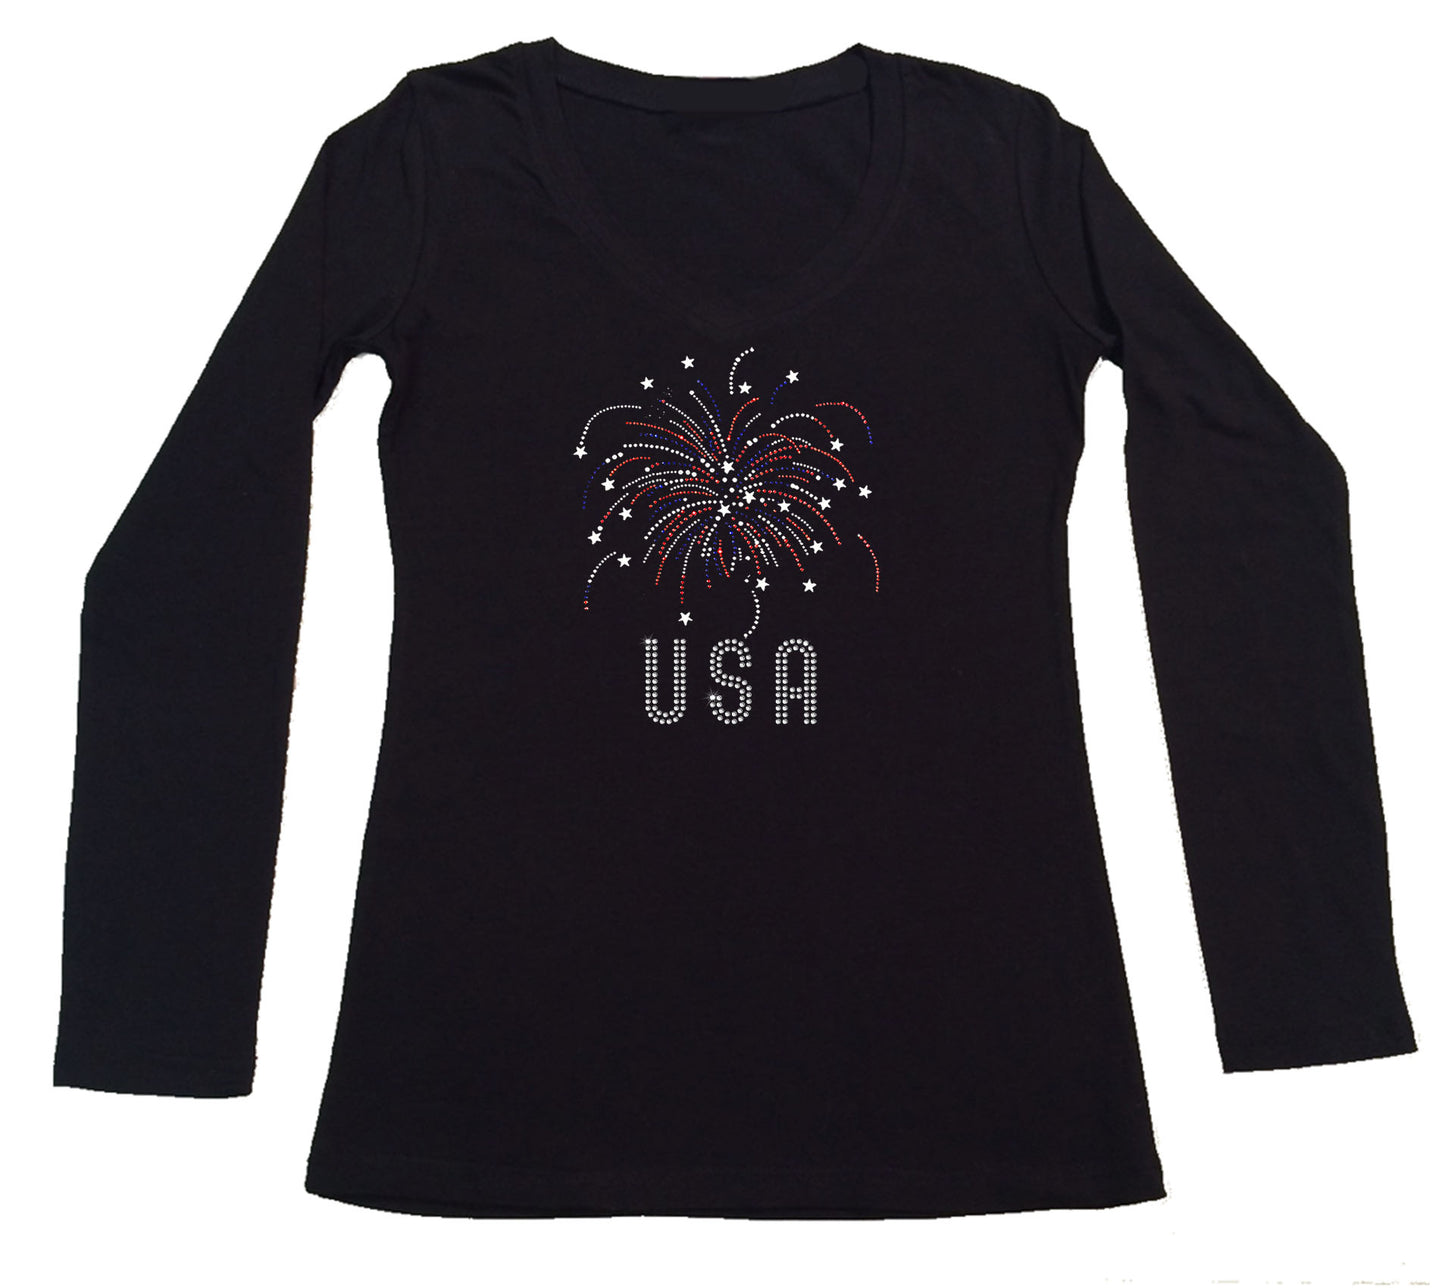 Womens T-shirt with Fireworks USA in Rhinestones